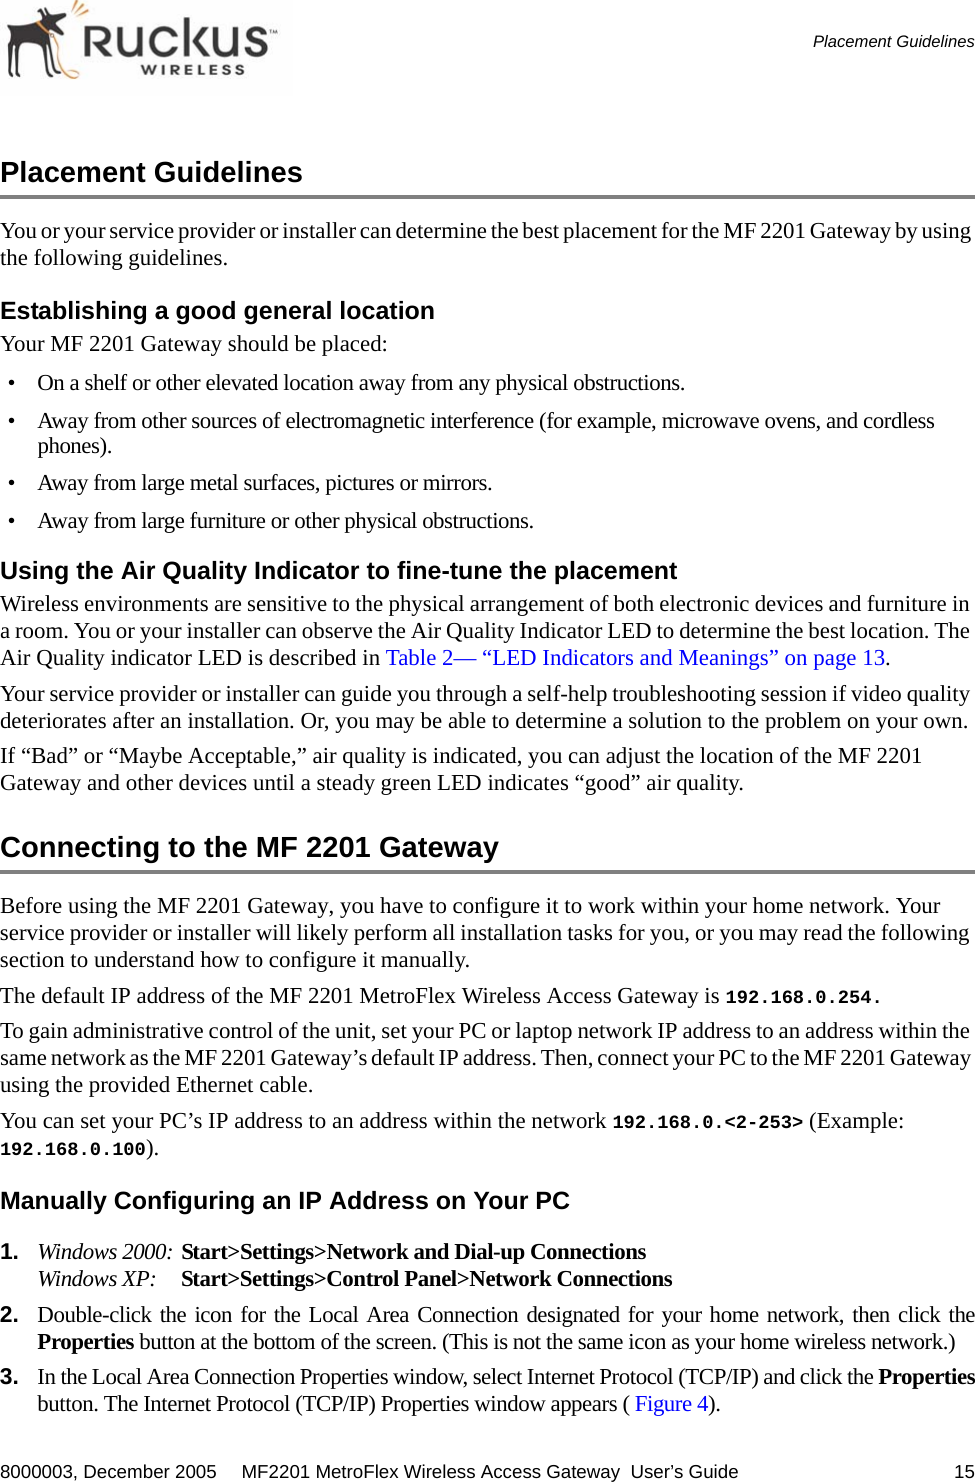 8000003, December 2005  MF2201 MetroFlex Wireless Access Gateway  User’s Guide 15Placement GuidelinesPlacement GuidelinesYou or your service provider or installer can determine the best placement for the MF 2201 Gateway by using the following guidelines. Establishing a good general location Your MF 2201 Gateway should be placed:• On a shelf or other elevated location away from any physical obstructions.• Away from other sources of electromagnetic interference (for example, microwave ovens, and cordless phones).• Away from large metal surfaces, pictures or mirrors.• Away from large furniture or other physical obstructions.Using the Air Quality Indicator to fine-tune the placementWireless environments are sensitive to the physical arrangement of both electronic devices and furniture in a room. You or your installer can observe the Air Quality Indicator LED to determine the best location. The Air Quality indicator LED is described in Table 2— “LED Indicators and Meanings” on page 13.Your service provider or installer can guide you through a self-help troubleshooting session if video quality deteriorates after an installation. Or, you may be able to determine a solution to the problem on your own. If “Bad” or “Maybe Acceptable,” air quality is indicated, you can adjust the location of the MF 2201 Gateway and other devices until a steady green LED indicates “good” air quality.Connecting to the MF 2201 GatewayBefore using the MF 2201 Gateway, you have to configure it to work within your home network. Your service provider or installer will likely perform all installation tasks for you, or you may read the following section to understand how to configure it manually.The default IP address of the MF 2201 MetroFlex Wireless Access Gateway is 192.168.0.254.To gain administrative control of the unit, set your PC or laptop network IP address to an address within the same network as the MF 2201 Gateway’s default IP address. Then, connect your PC to the MF 2201 Gateway using the provided Ethernet cable.You can set your PC’s IP address to an address within the network 192.168.0.&lt;2-253&gt; (Example: 192.168.0.100).Manually Configuring an IP Address on Your PC1. Windows 2000: Start&gt;Settings&gt;Network and Dial-up Connections Windows XP: Start&gt;Settings&gt;Control Panel&gt;Network Connections2. Double-click the icon for the Local Area Connection designated for your home network, then click theProperties button at the bottom of the screen. (This is not the same icon as your home wireless network.) 3. In the Local Area Connection Properties window, select Internet Protocol (TCP/IP) and click the Propertiesbutton. The Internet Protocol (TCP/IP) Properties window appears ( Figure 4).